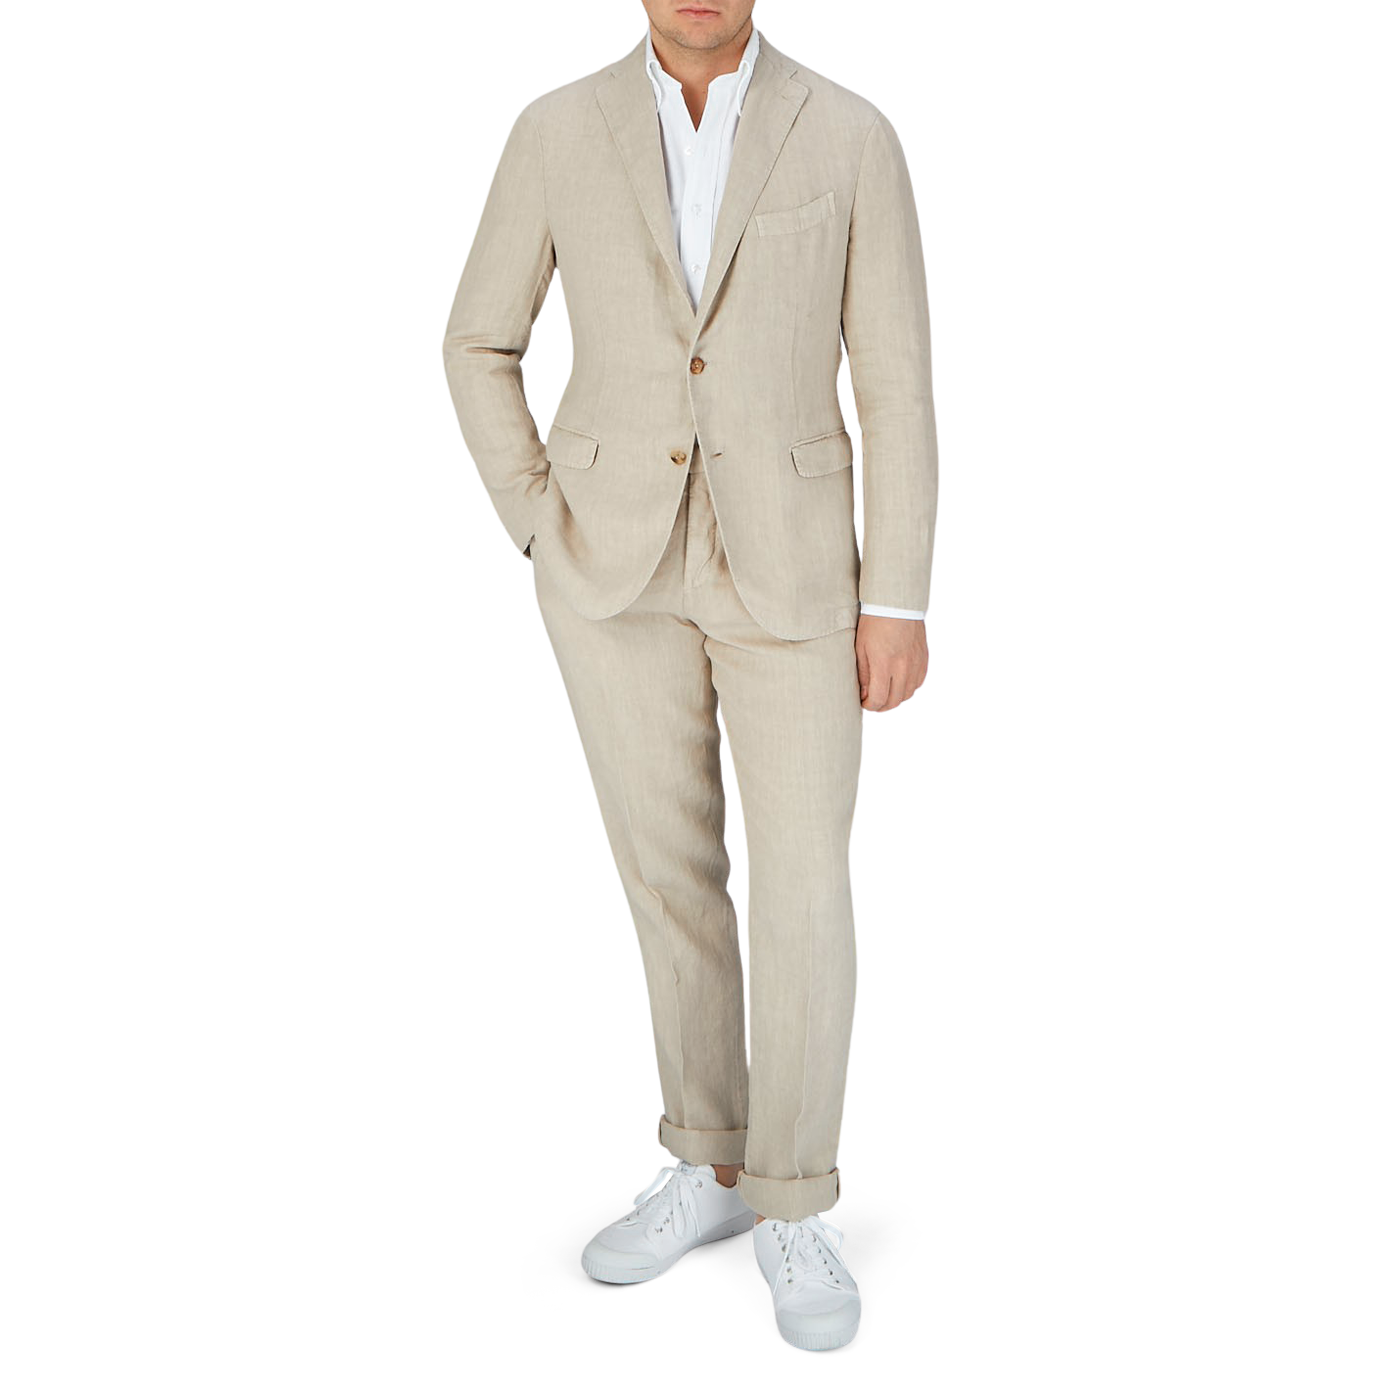 A man in a Boglioli Sand Beige Washed Linen Unstructured Suit, posing for a photo.